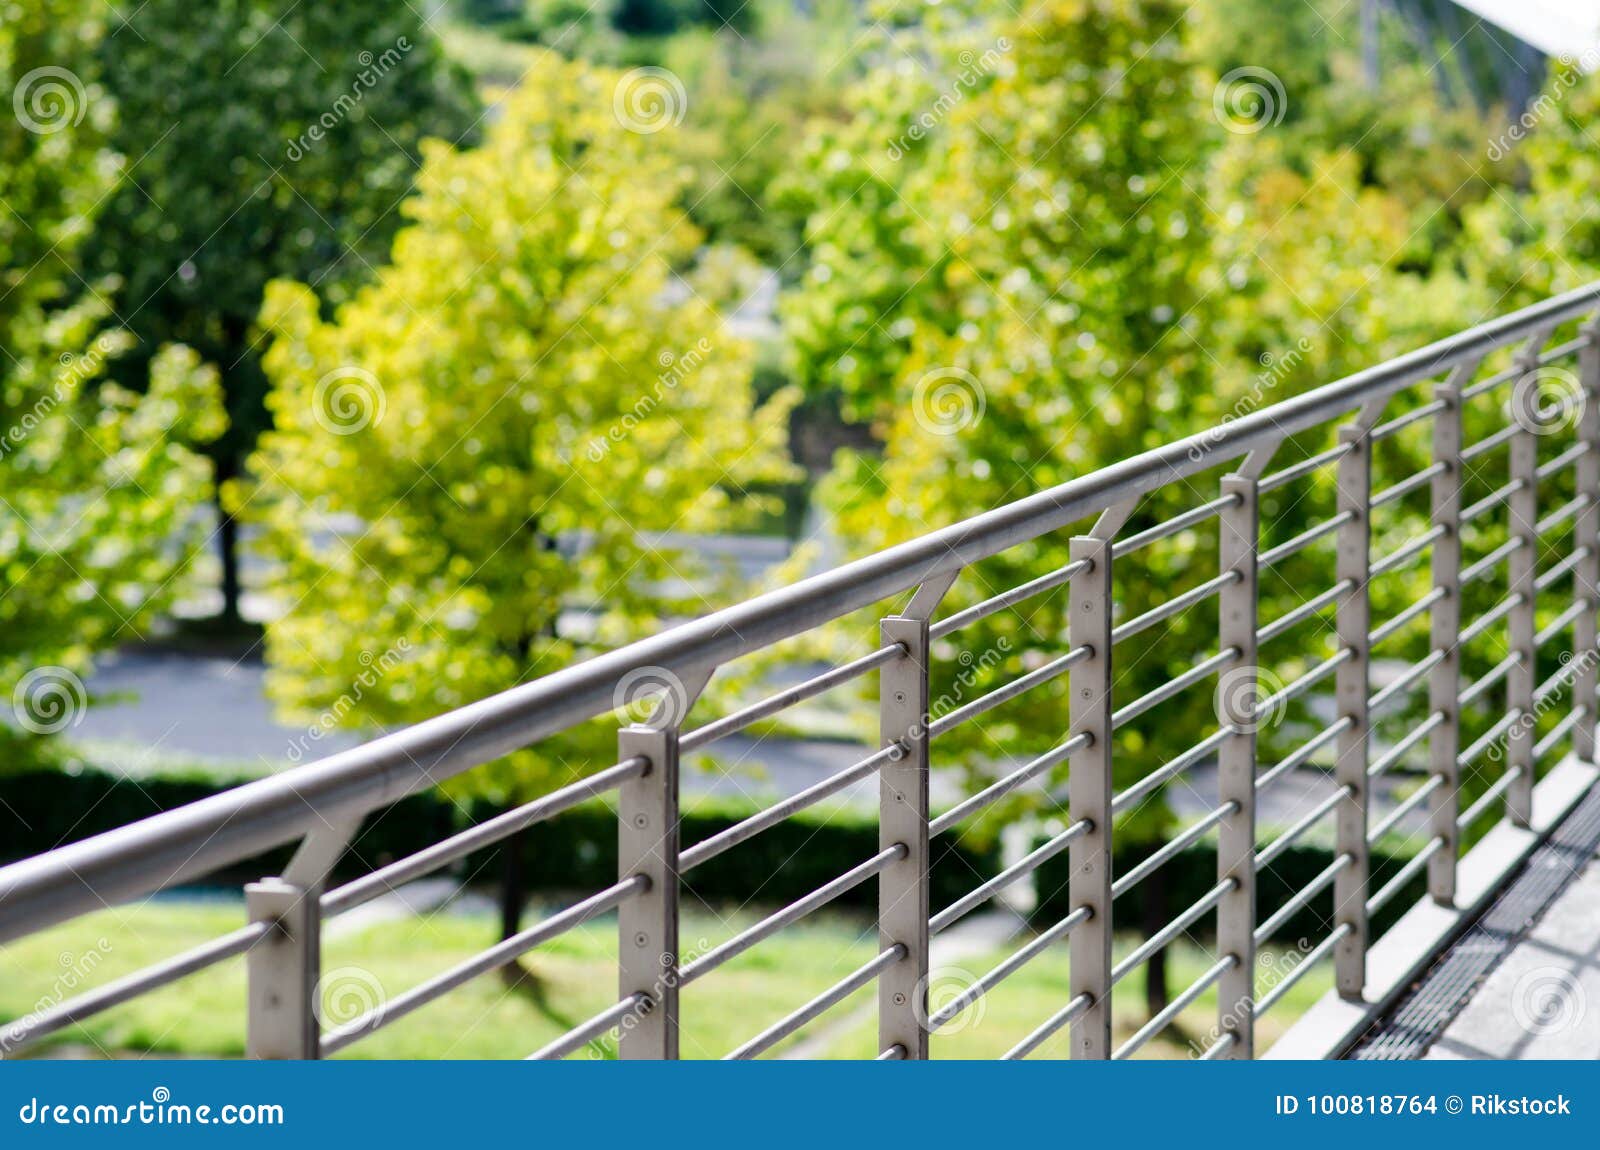 architecture, railing on tree-lined park.